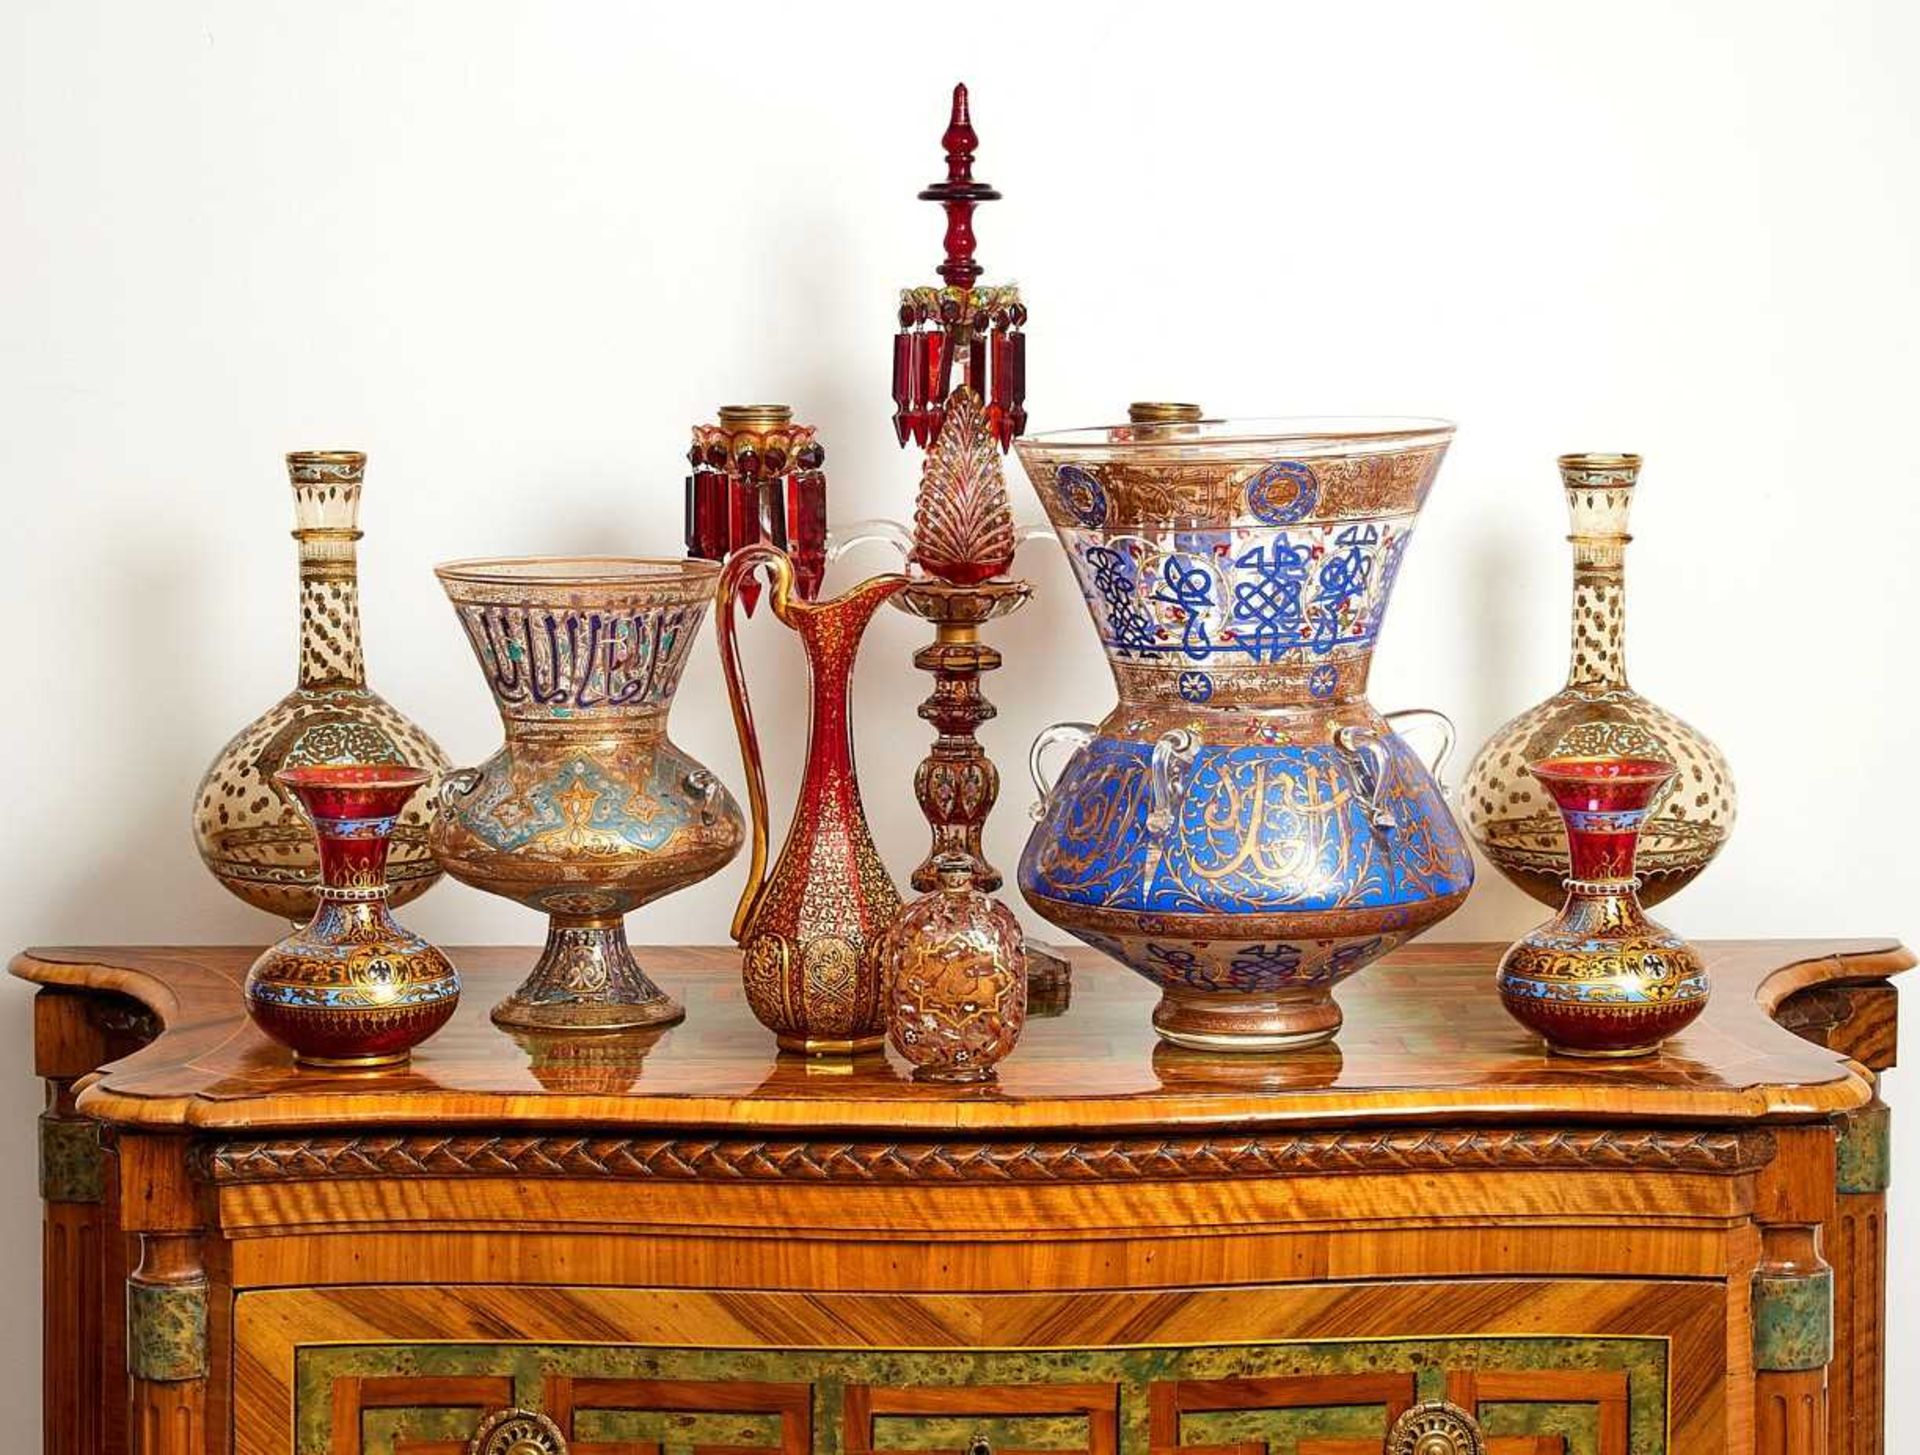 A LARGE MAMLUK REVIVAL ENAMELLED GLASS MOSQUE LAMP IN THE MANNER OF BROCARD - Image 2 of 9